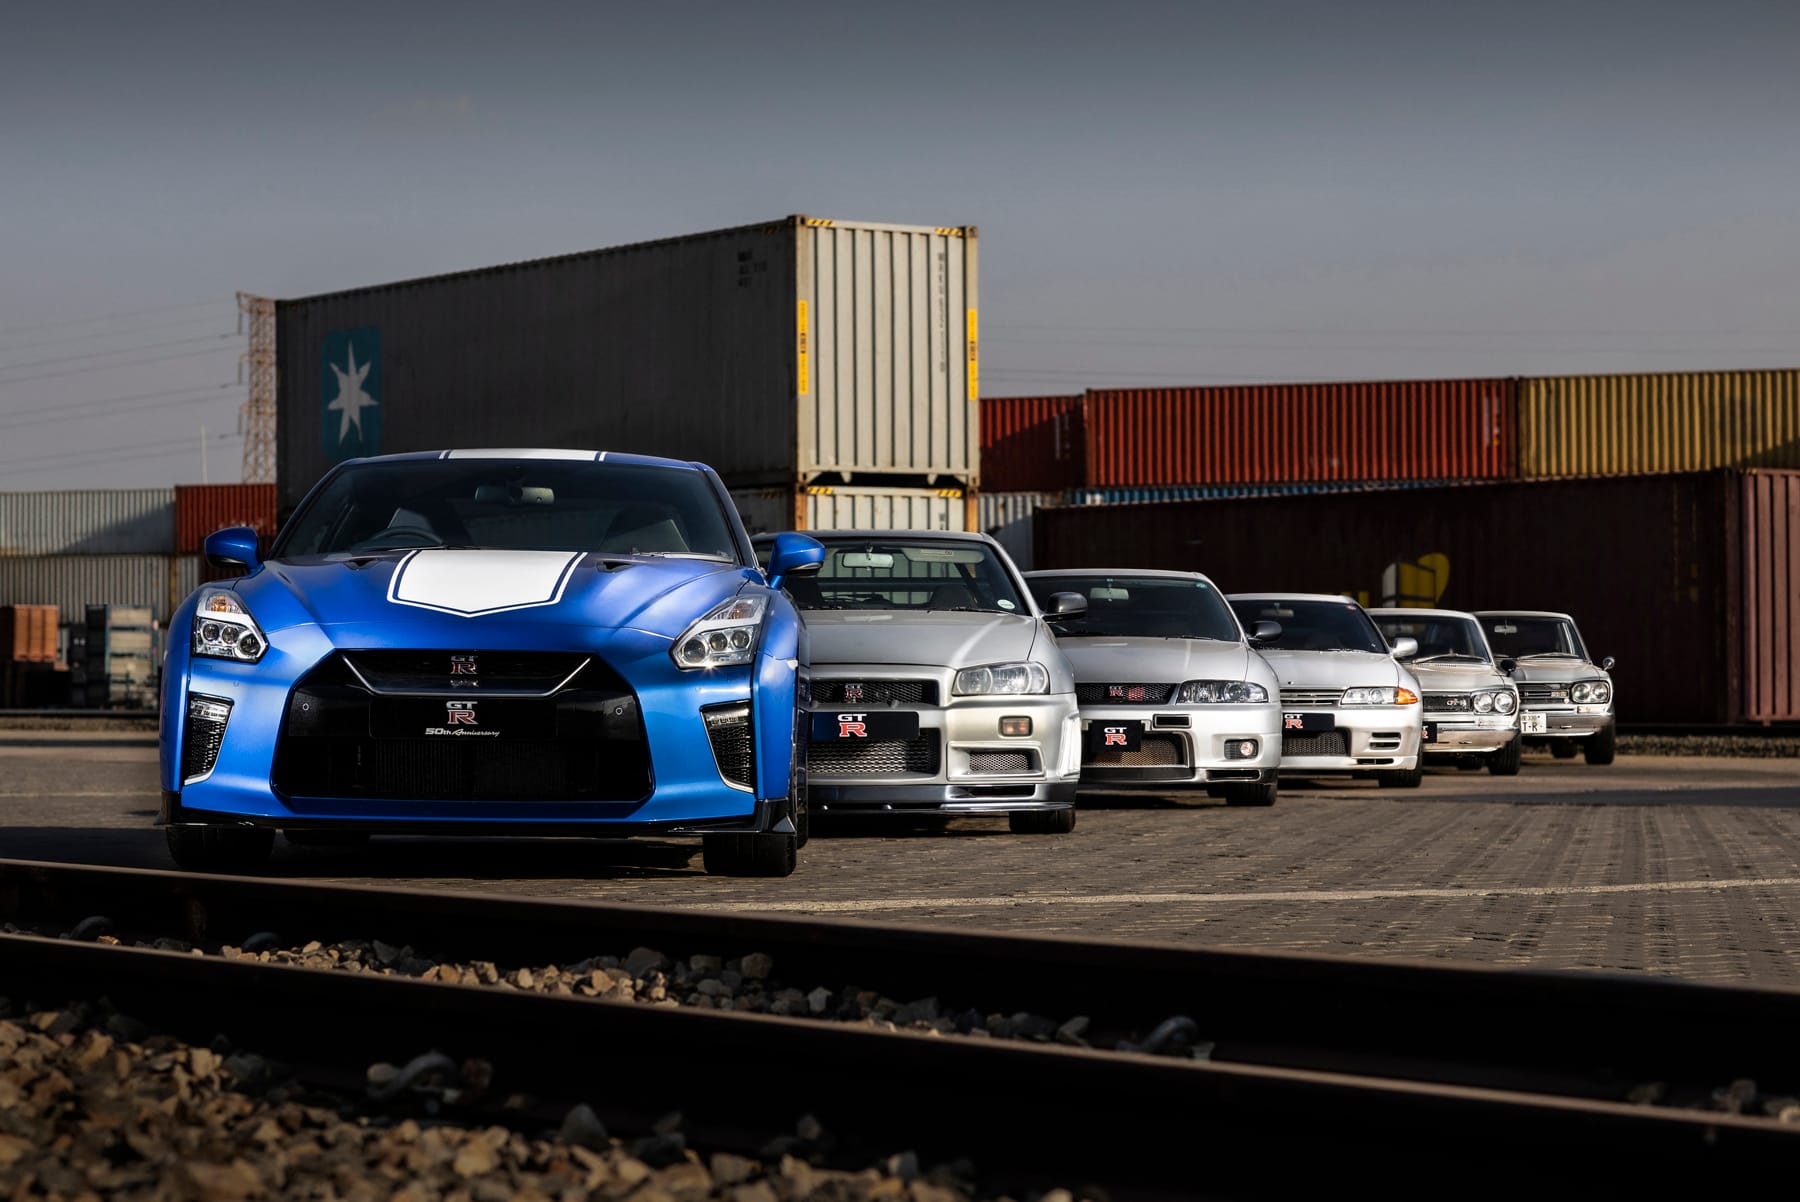 Why the Nissan Skyline GT-R Is a Cultural Icon | Hypebeast